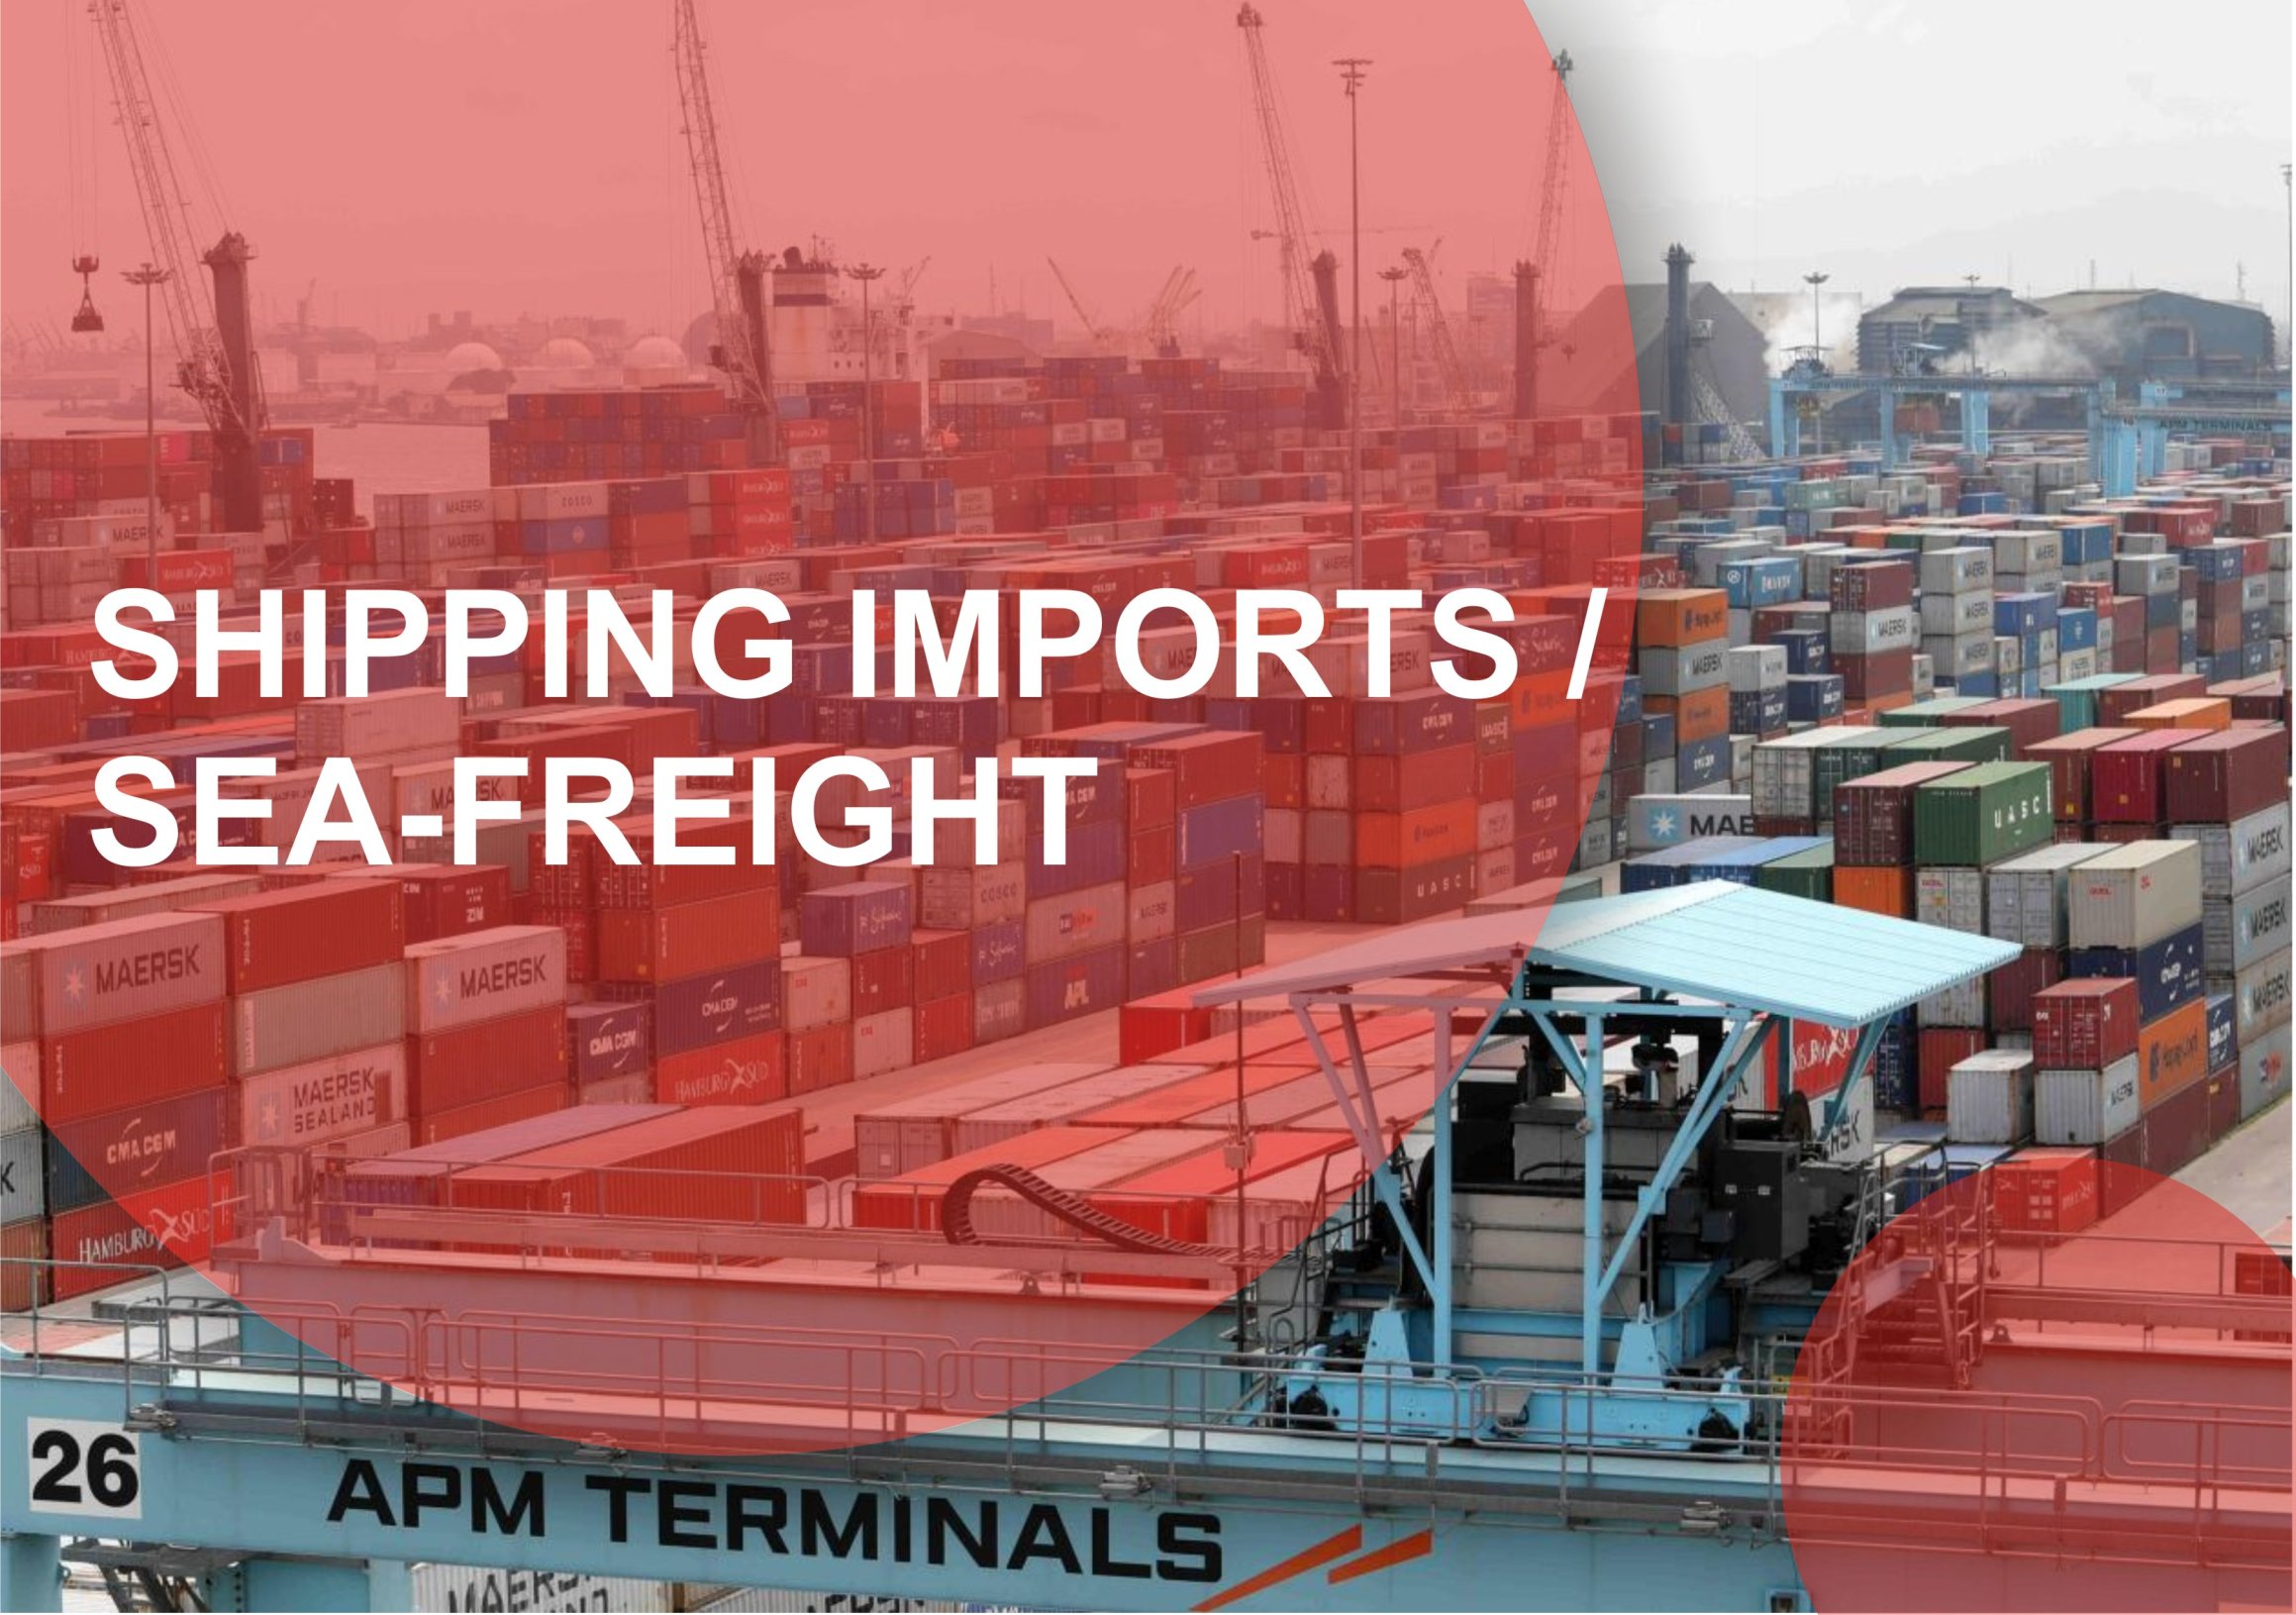 Why Most Importations Are Preferably Done Via Sea